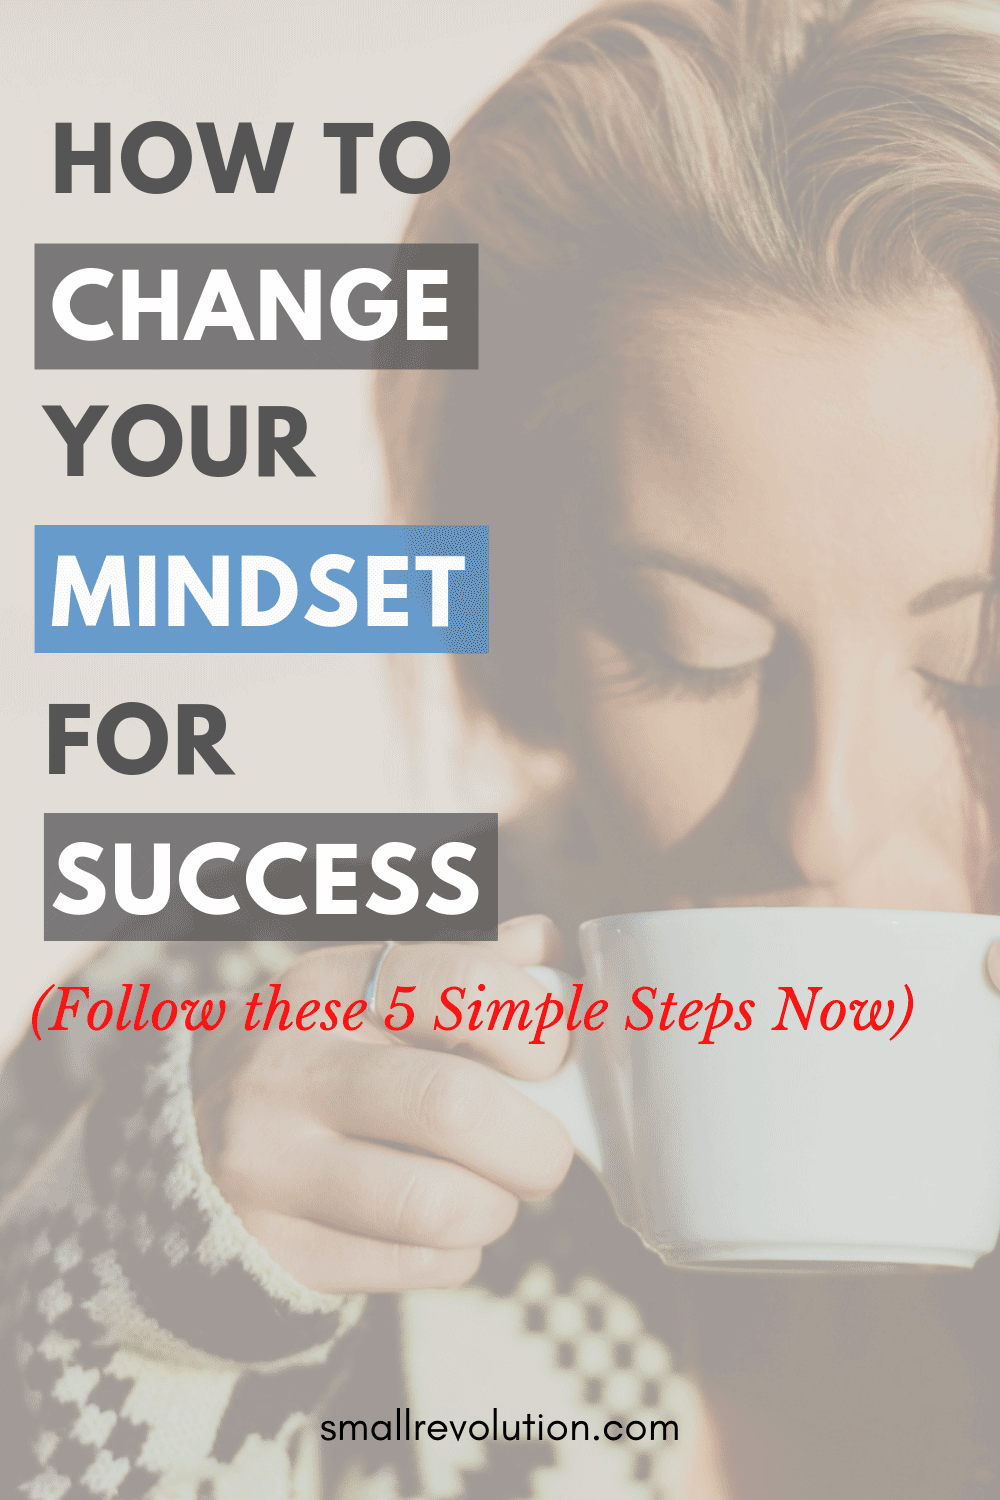 How to Change Your Mindset for Success